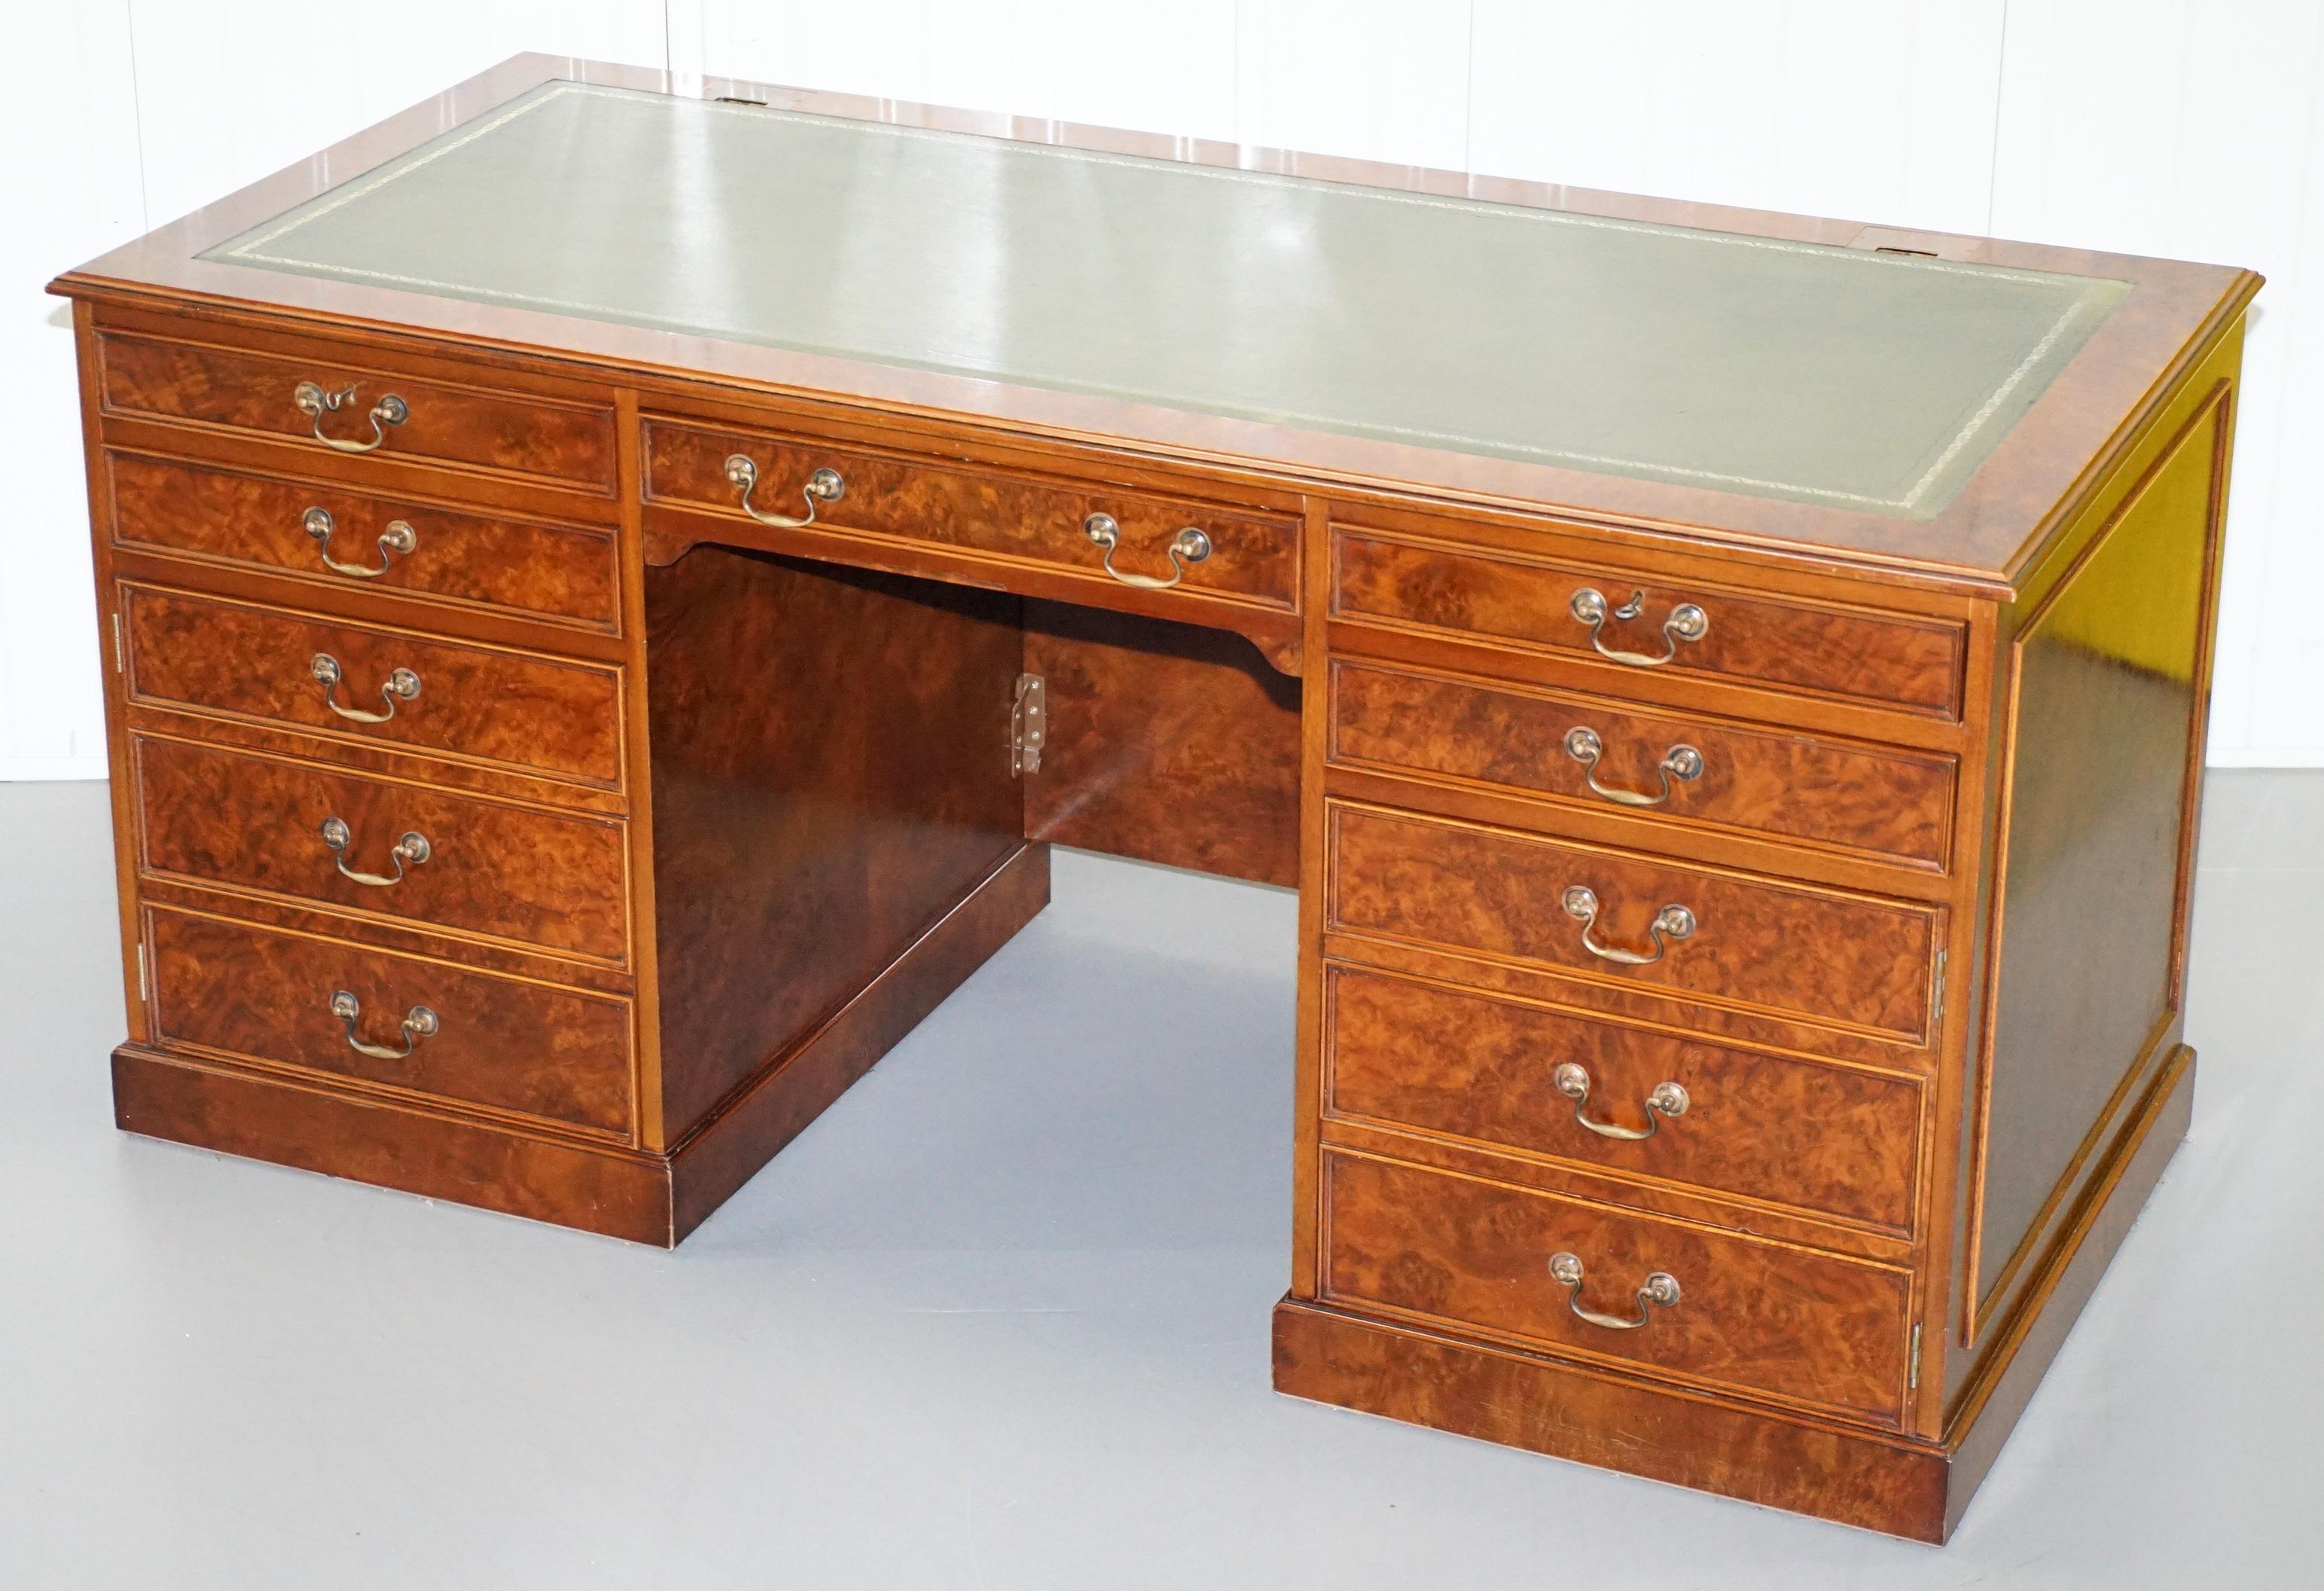 We are delighted to this stunning large luxury premium Burr Walnut twin pedestal partner desk specially designed to house a tower Computer and fully panelled

I have the matching three drawer filing cabinet listed under my other items 

A